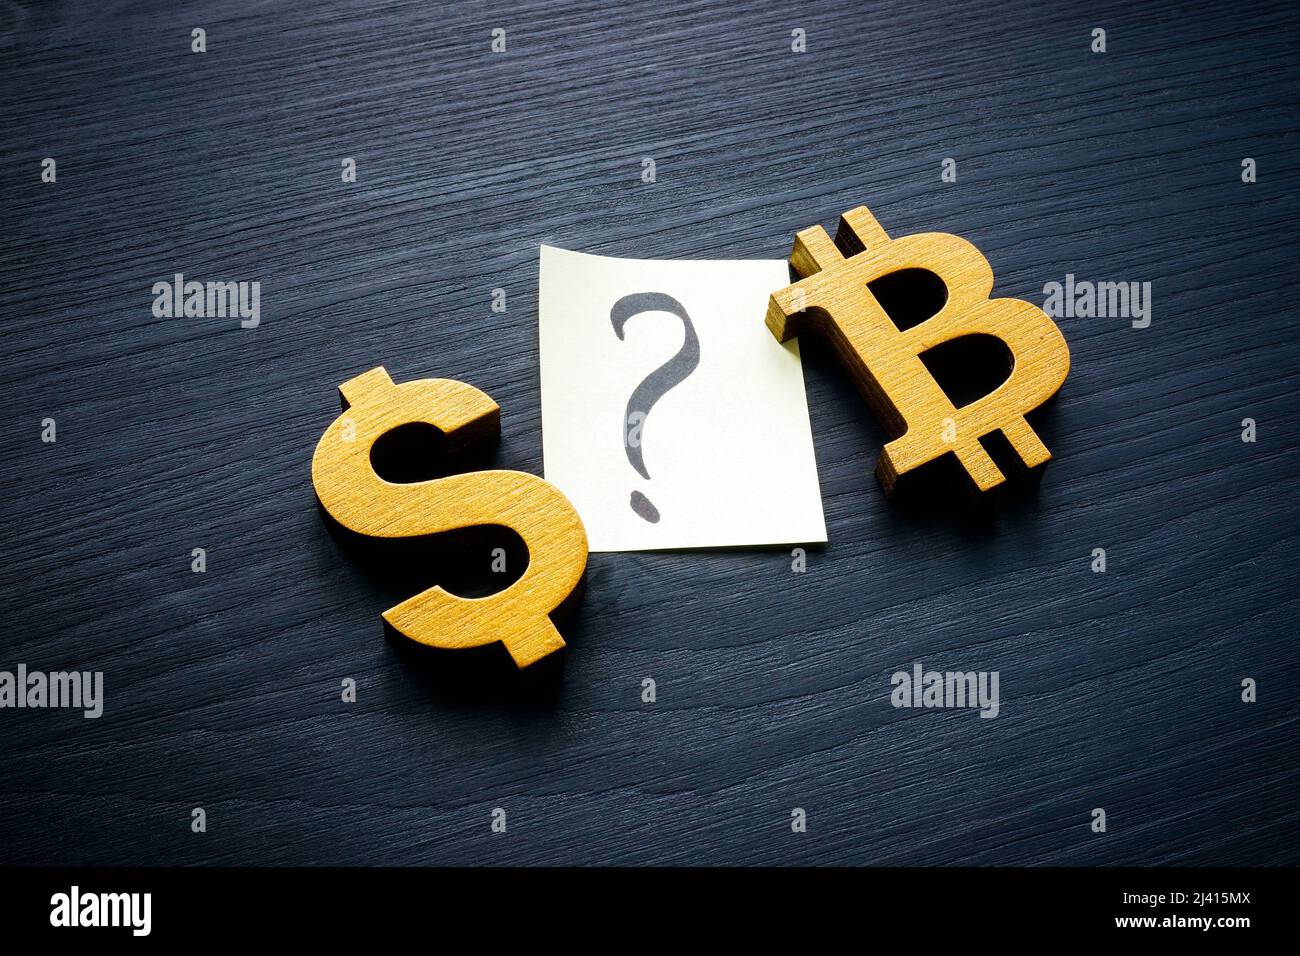 Dollar and Bitcoin signs and question mark as buy or sell concept. Stock Photo